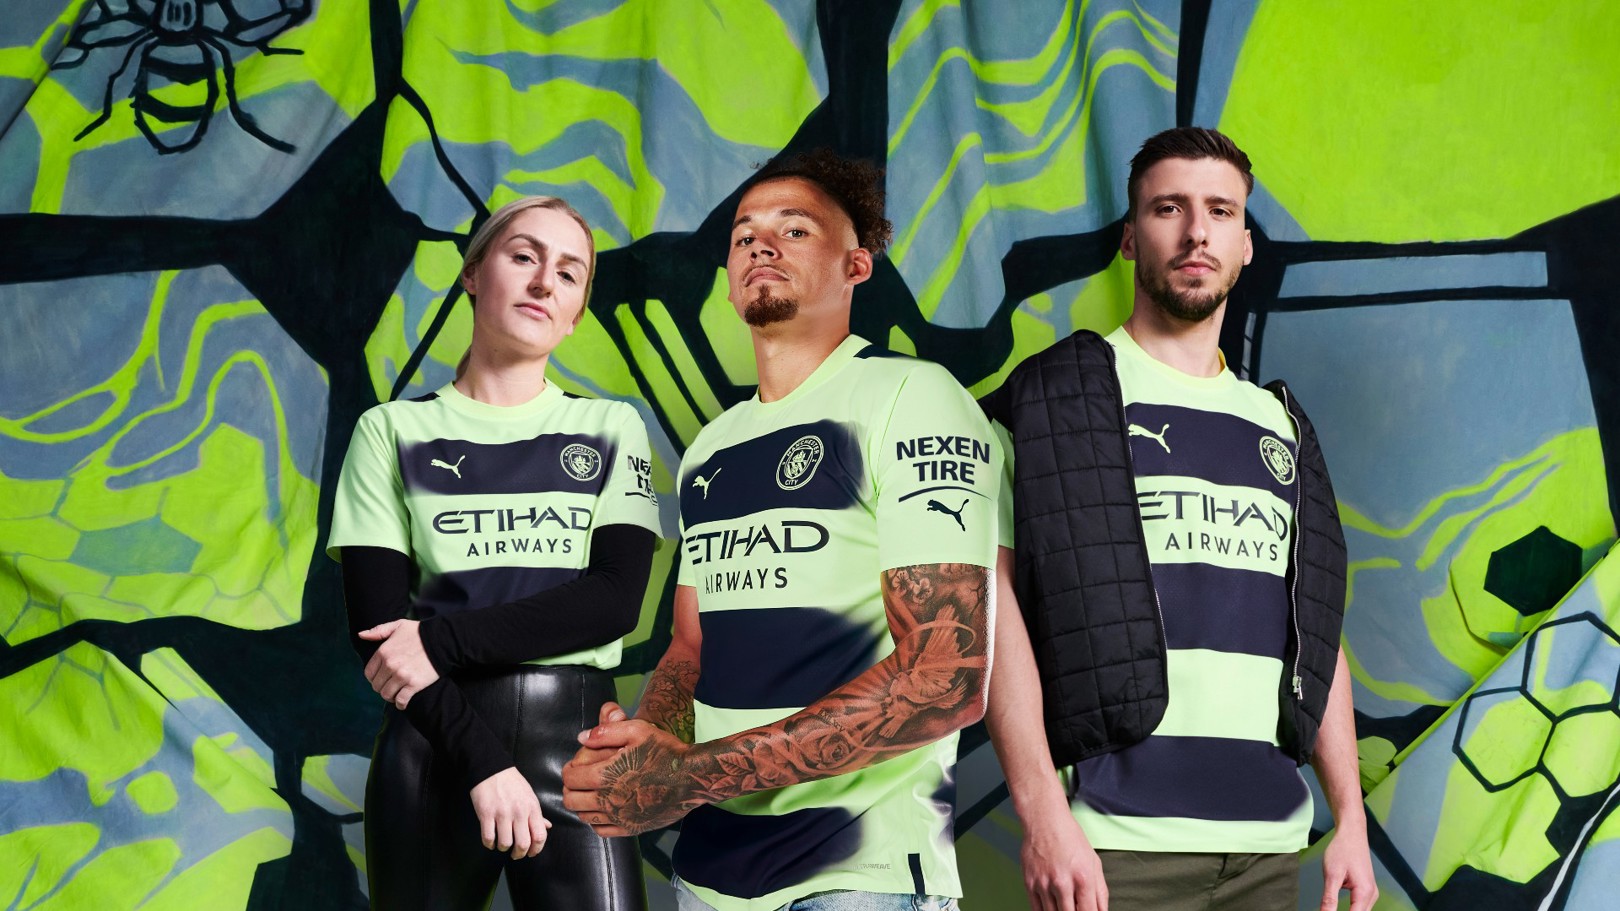 PUMA's new football kits evolve from the culture of the cities